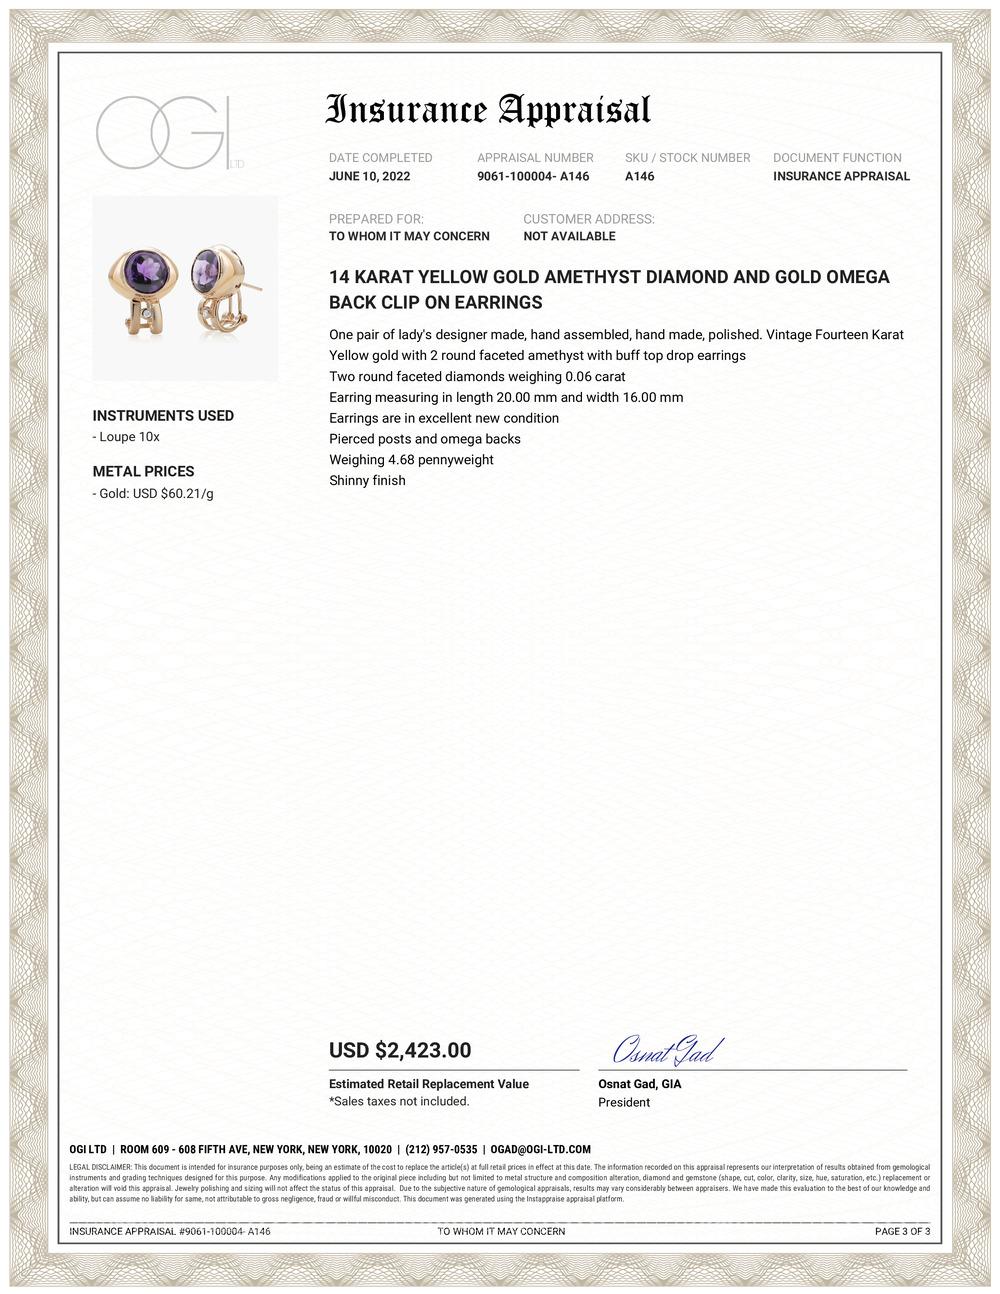 Fourteen Karat Yellow gold with 2 round faceted amethyst with buff top drop earrings
Two round faceted diamonds weighing 0.06 carat 
Earring measuring in length 20.00 mm and width 16.00 mm
Earrings are in excellent new condition
Pierced posts and